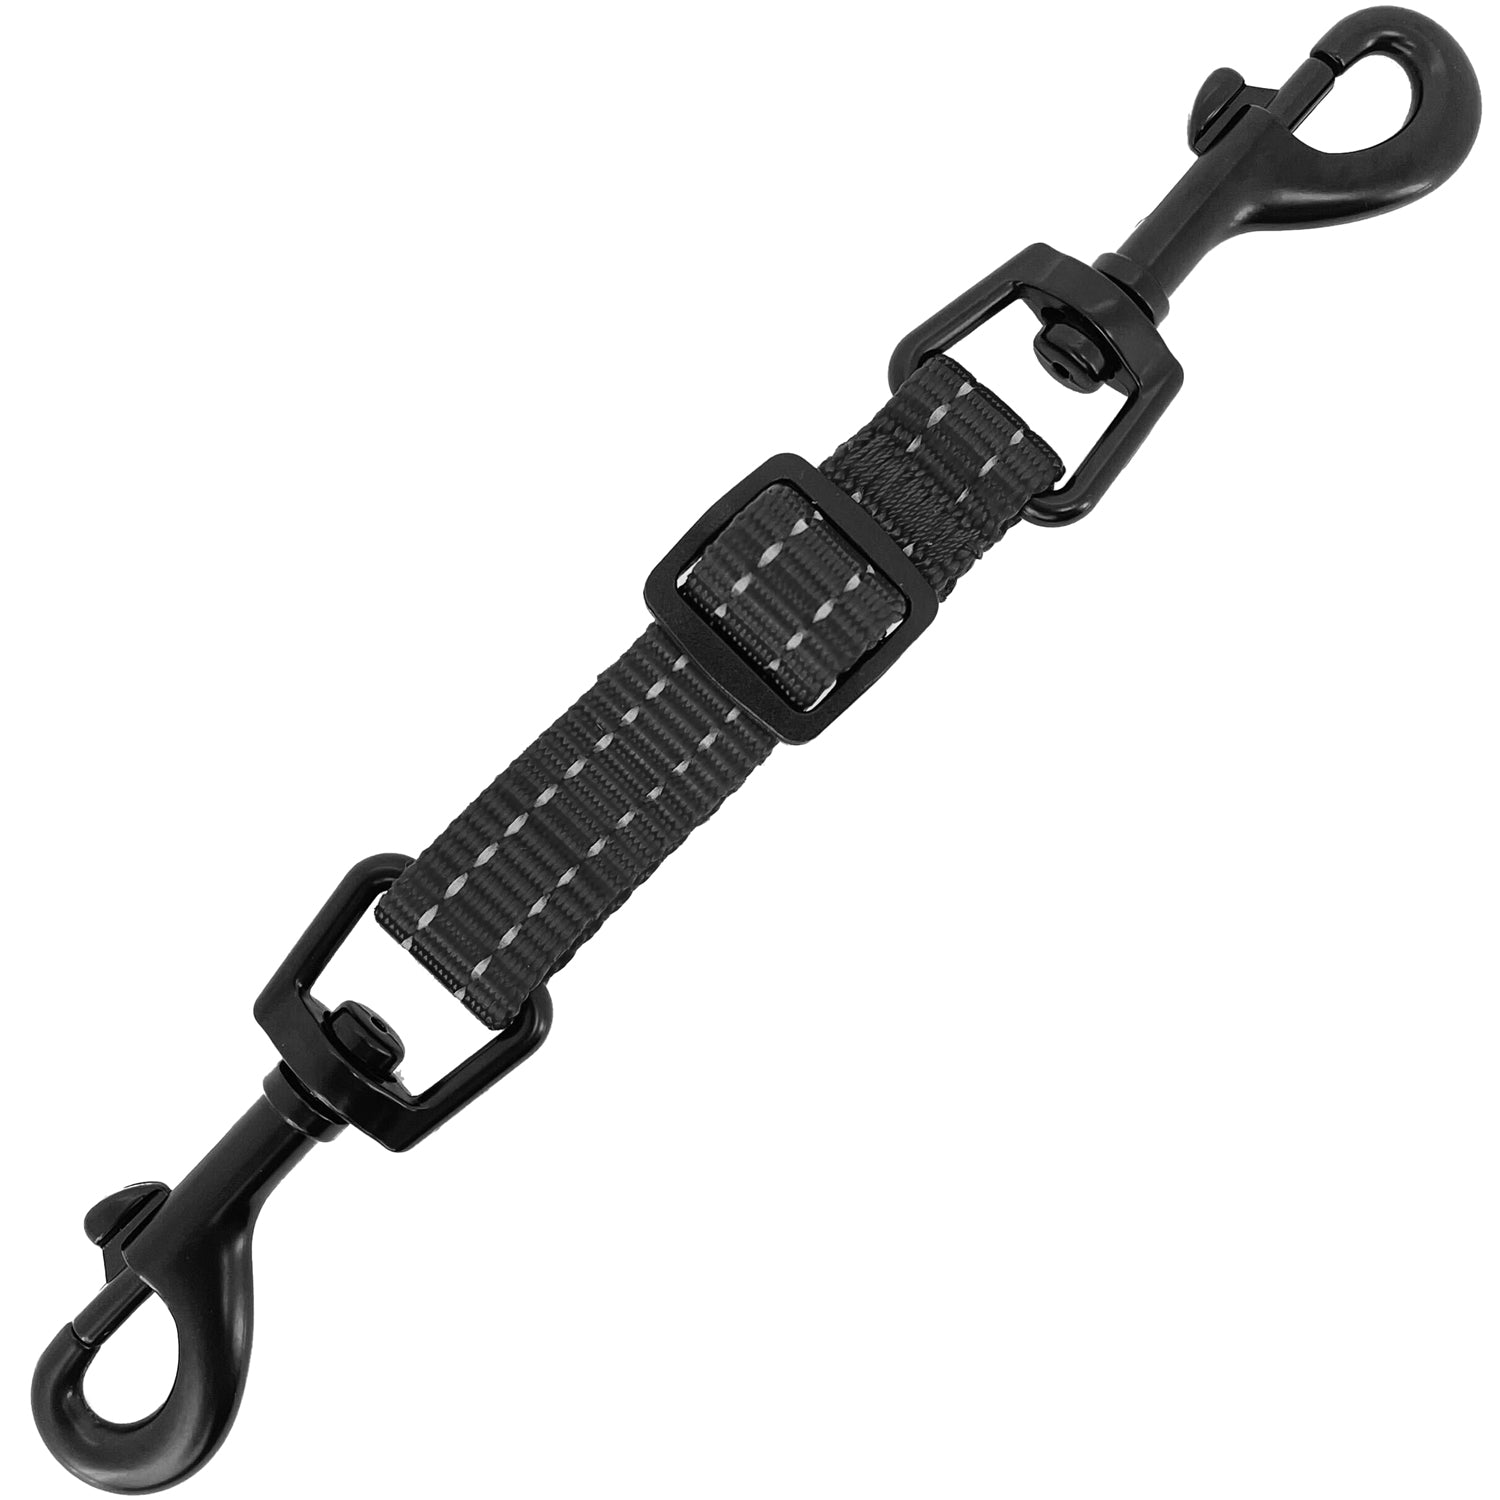 Dual-Clasp Safety Clip: Ultimate Collar & Harness Connection